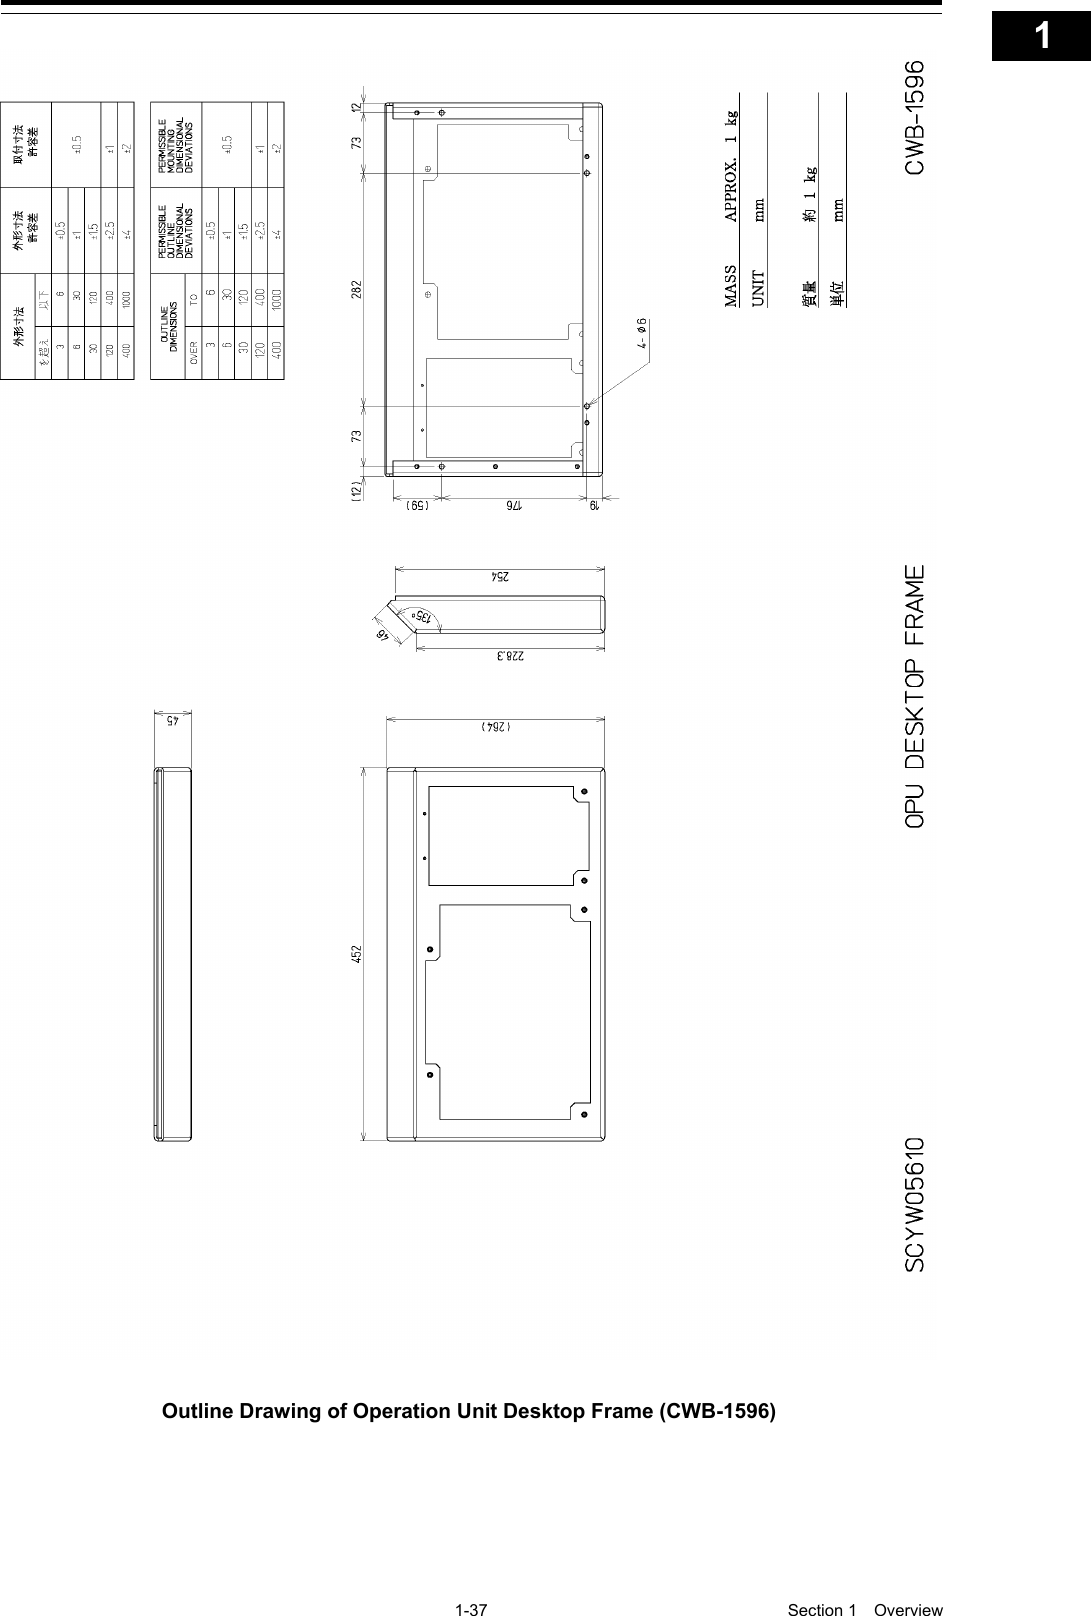   1-37  Section 1  Overview    1  2  3  4  5  6  7  8  9  10  11  12  13  14  15  16  17  18  19  20  21  22  23  24  25  26  27  付録      Outline Drawing of Operation Unit Desktop Frame (CWB-1596)  